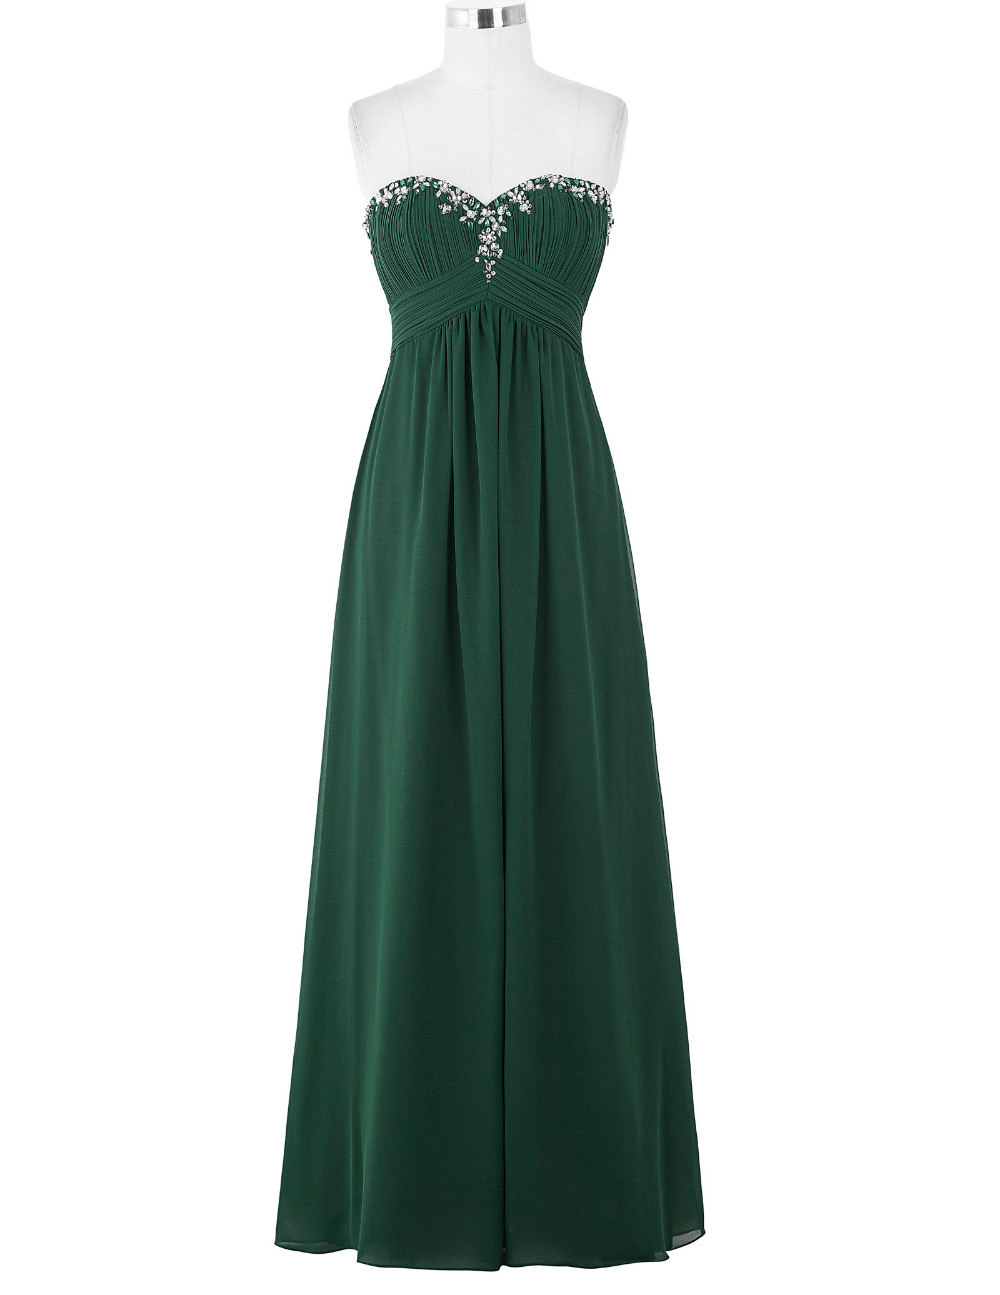 Forest Green Beaded Embellished Ruched Sweetheart Floor Length A-line Formal Dress, Prom Dress